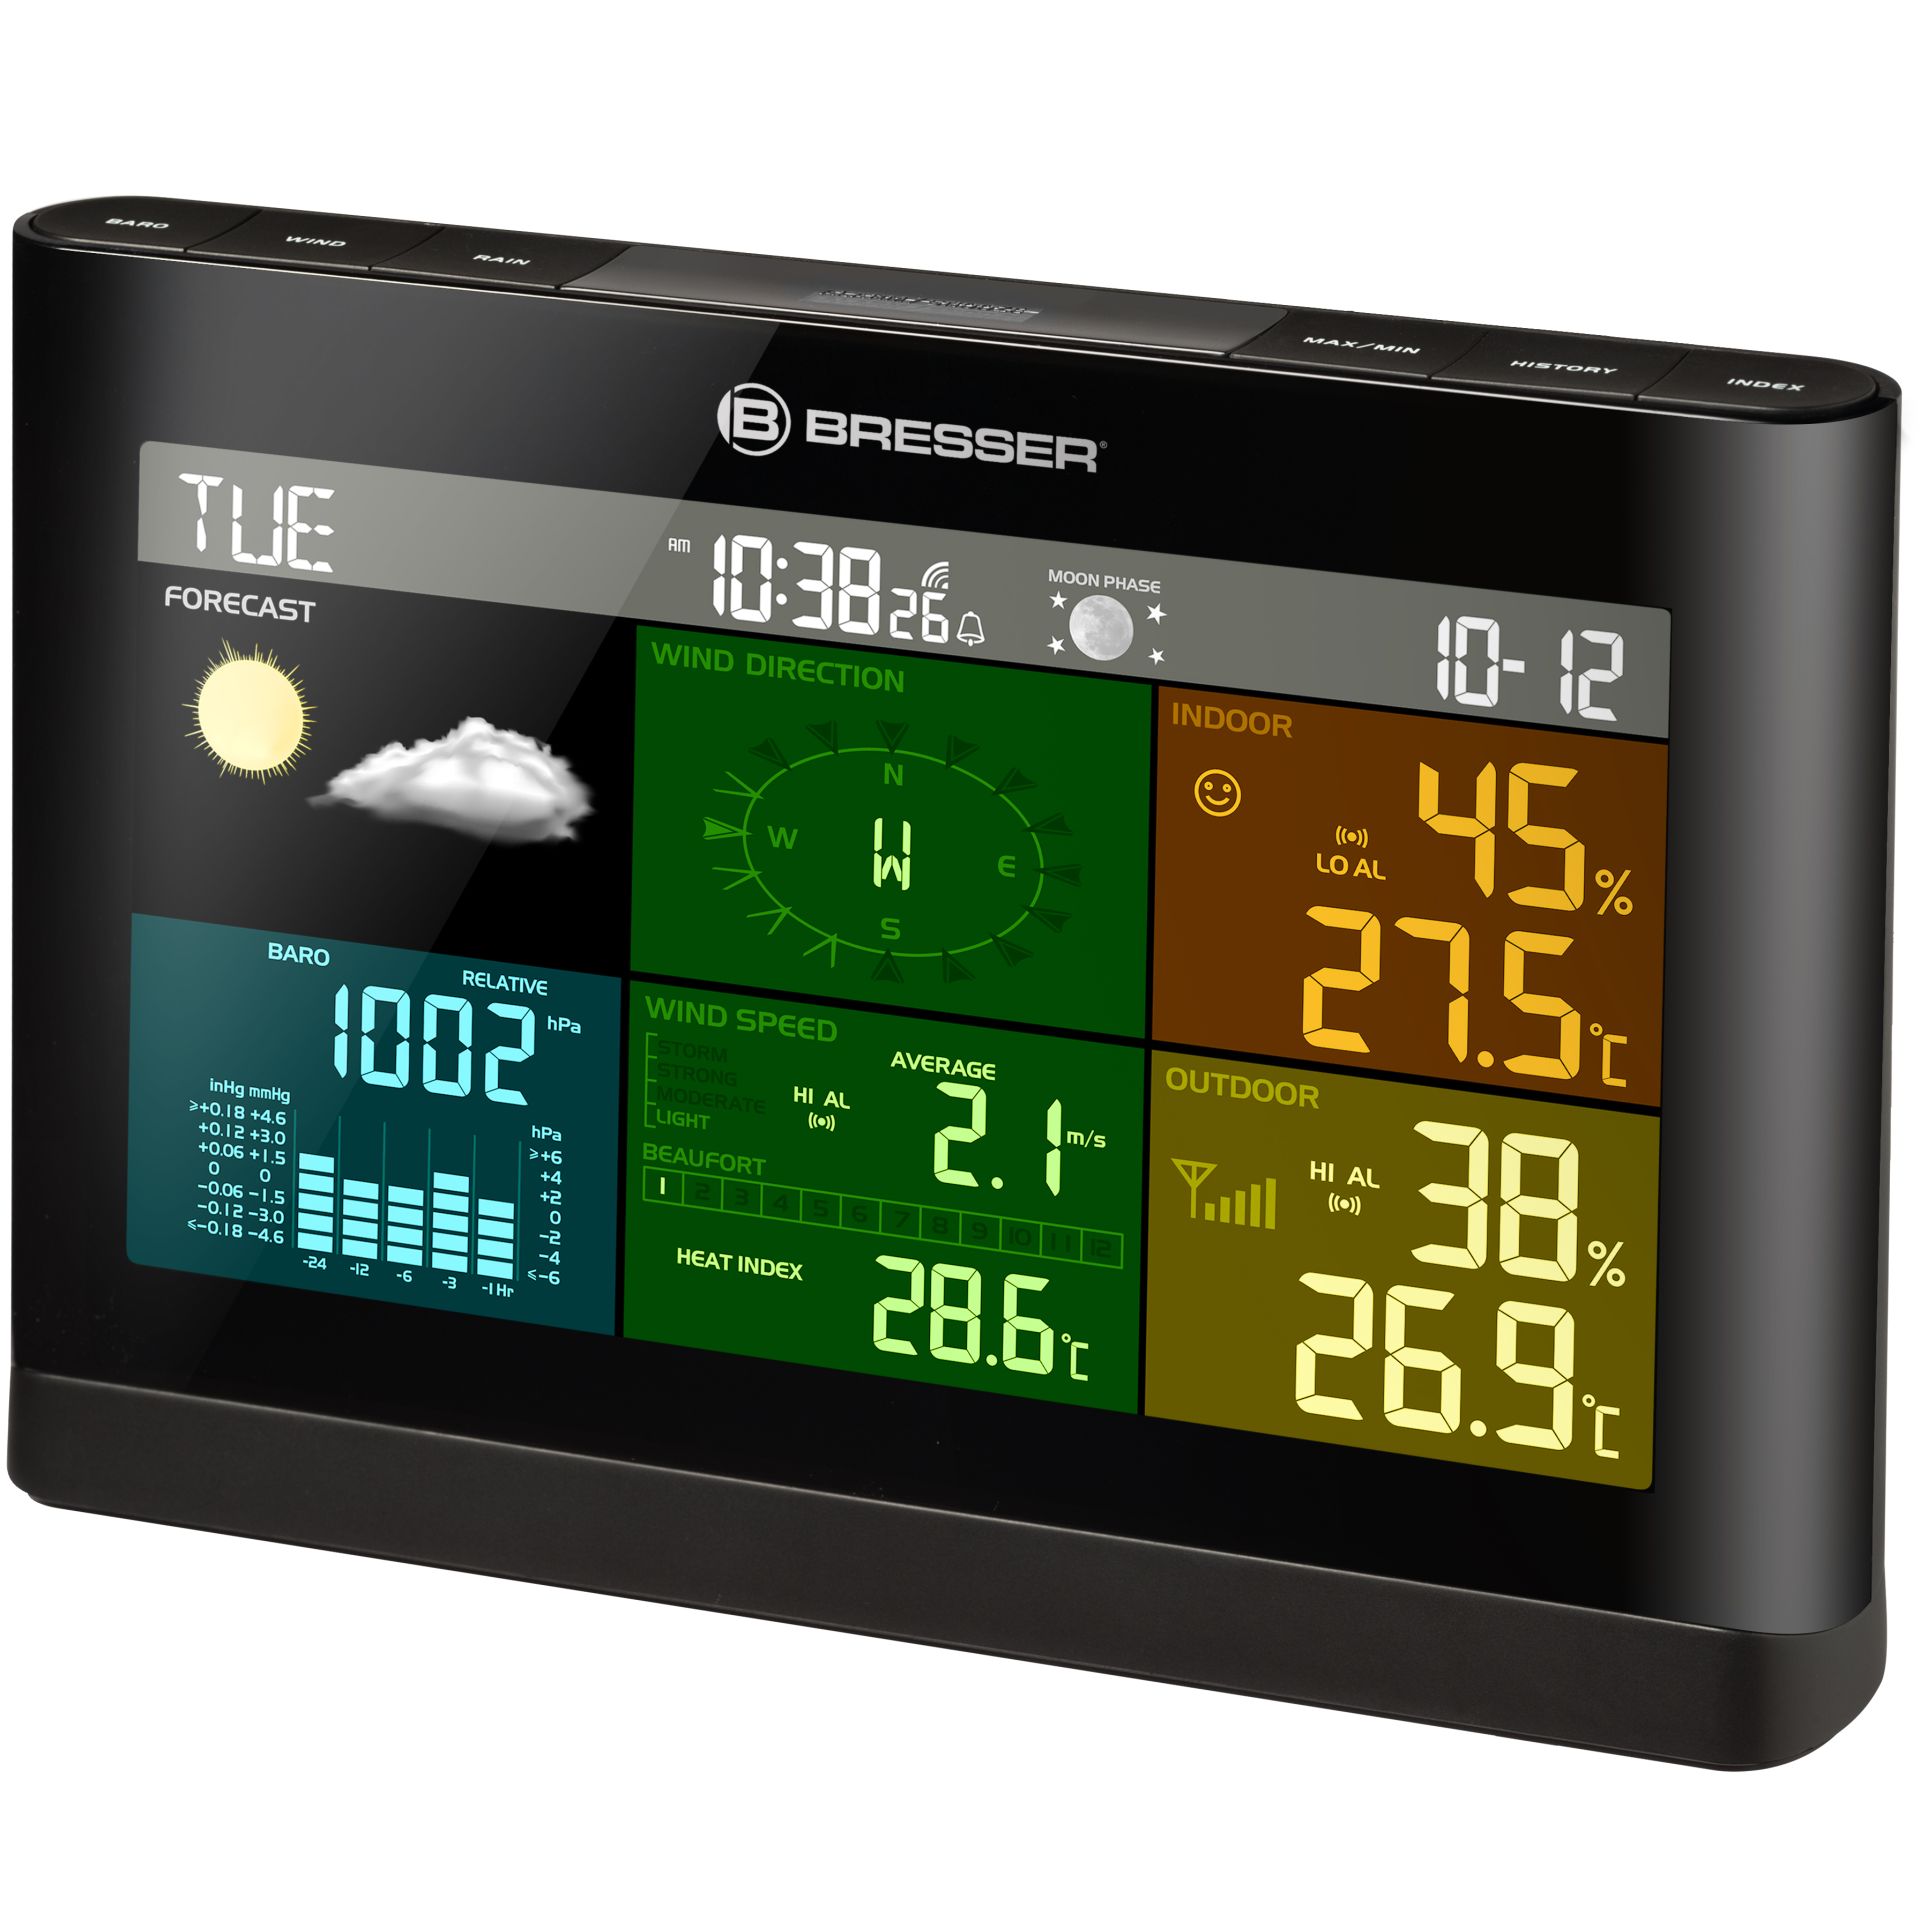 BRESSER 5-in-1 Comfort Weather Station with Colour Display | black ...